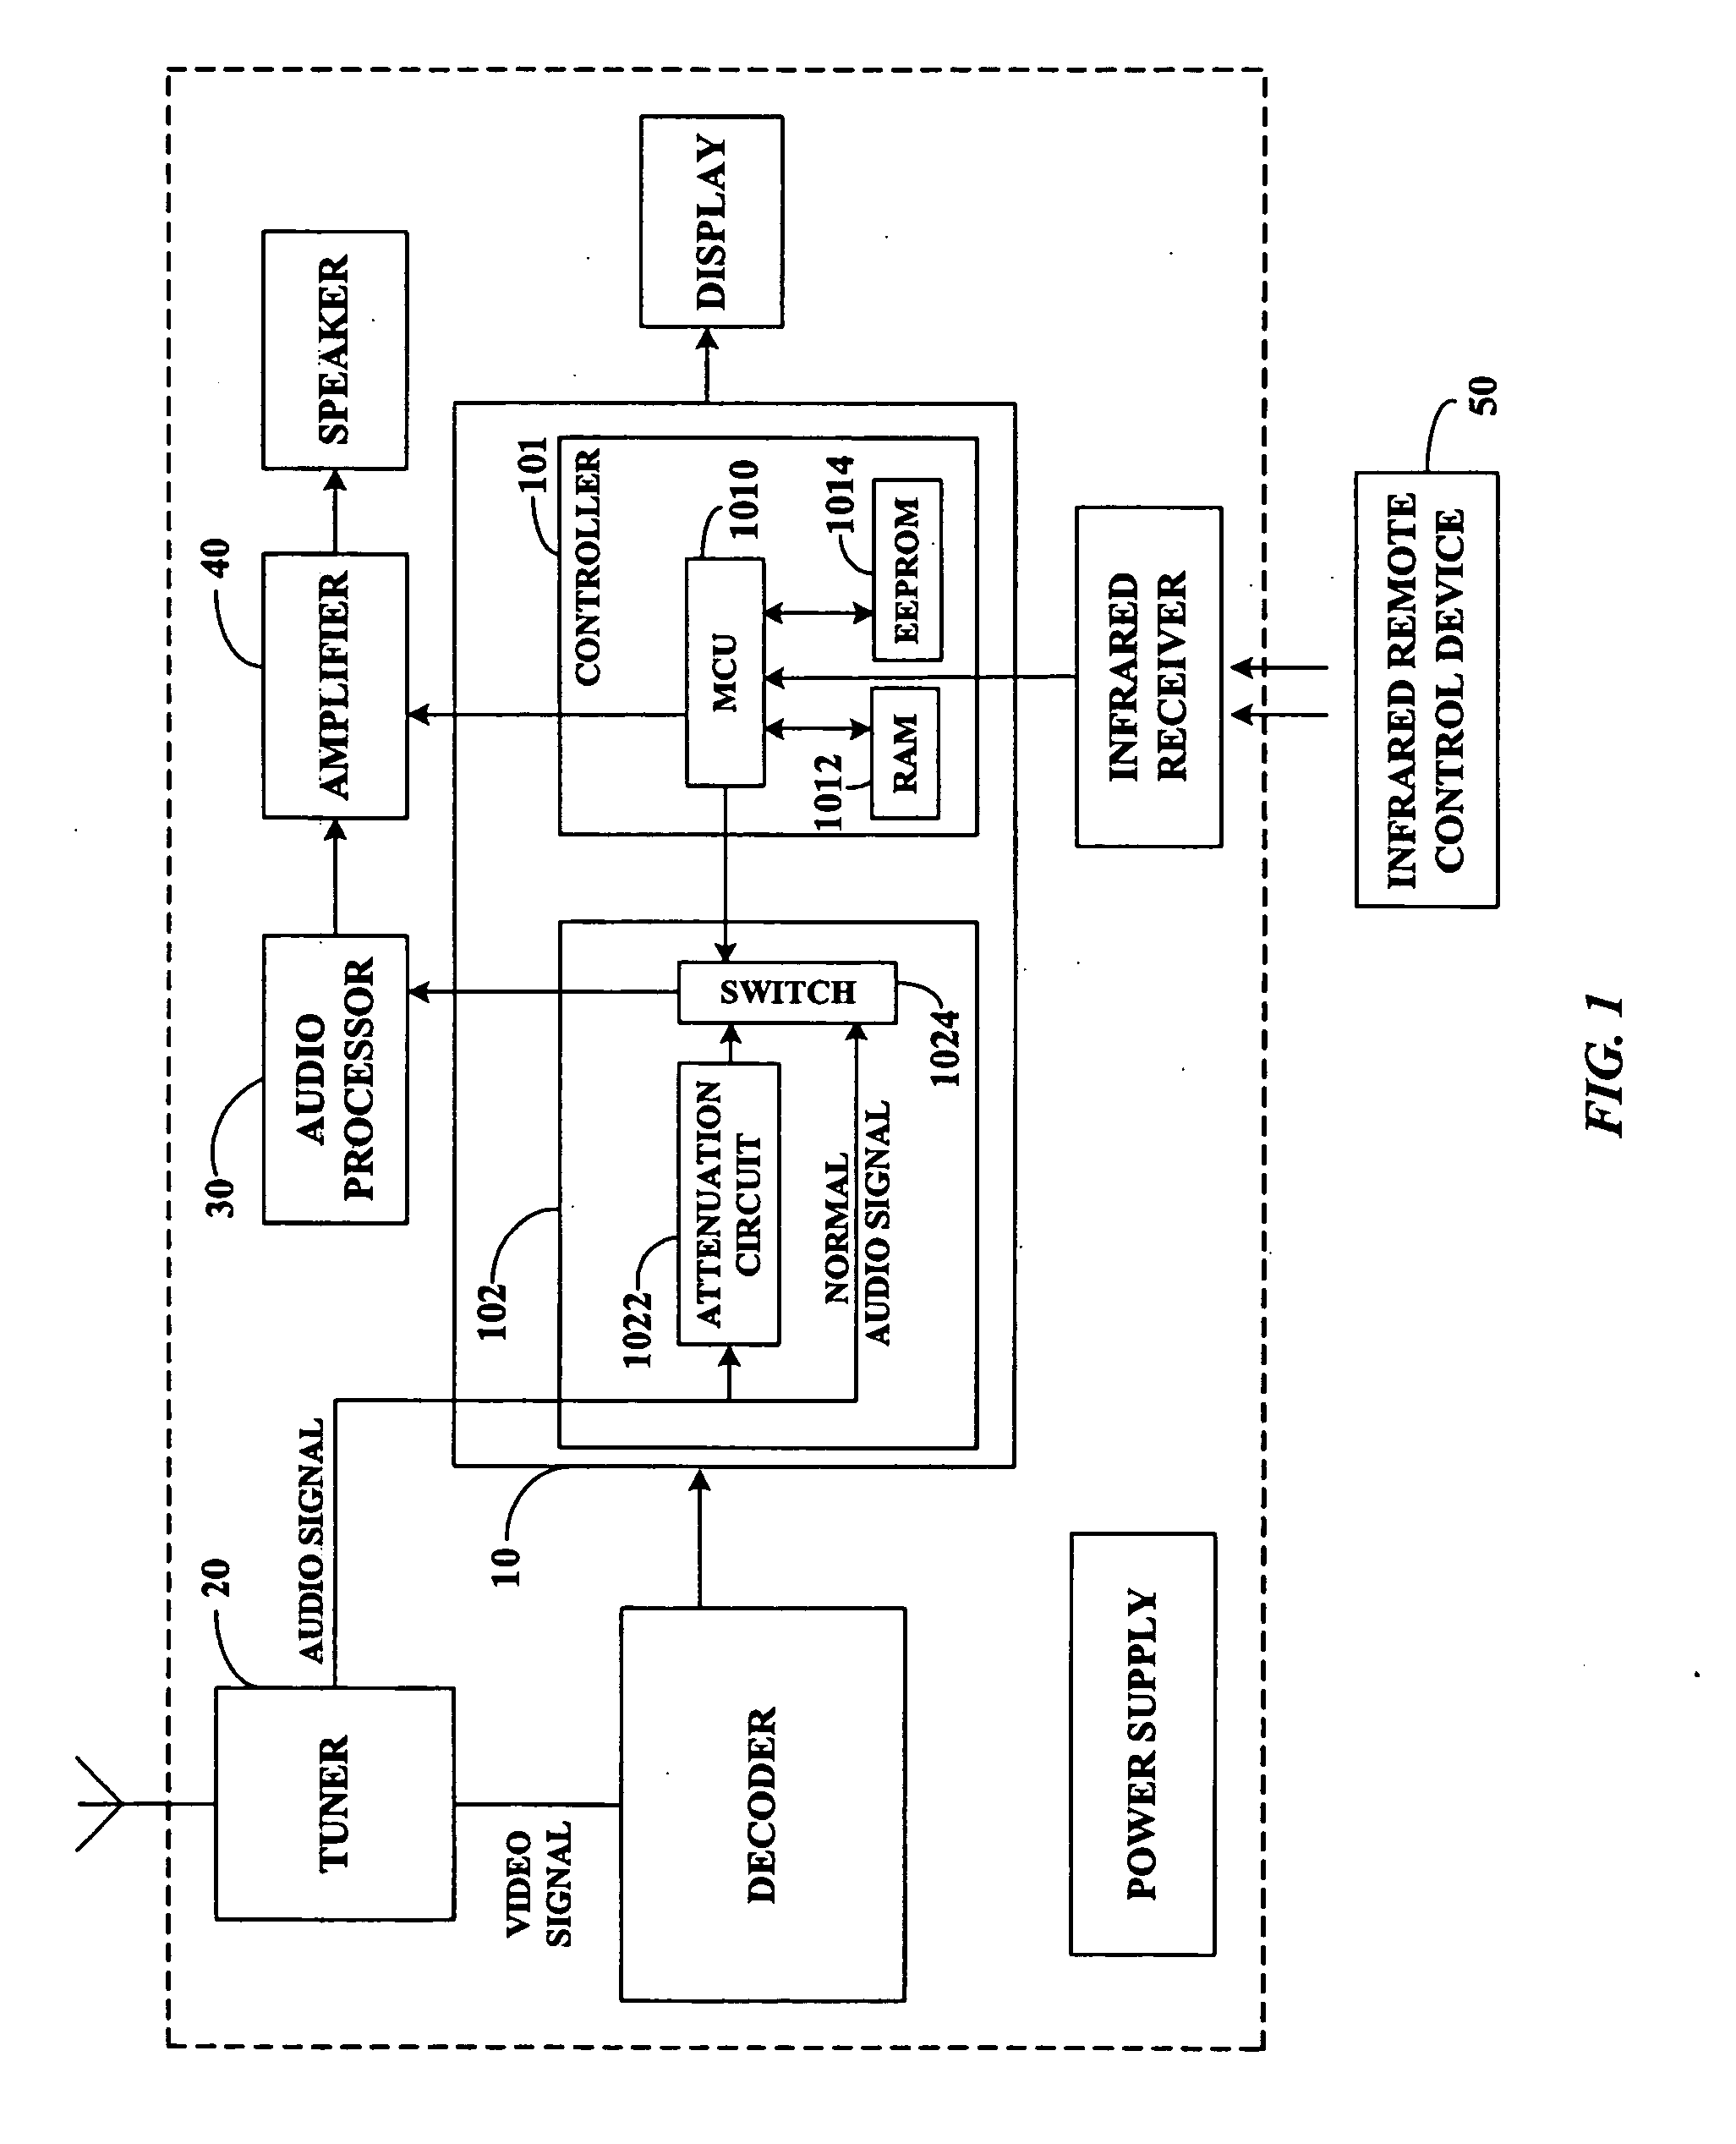 Apparatus and method for adjusting sound volume for televisions and other audio systems